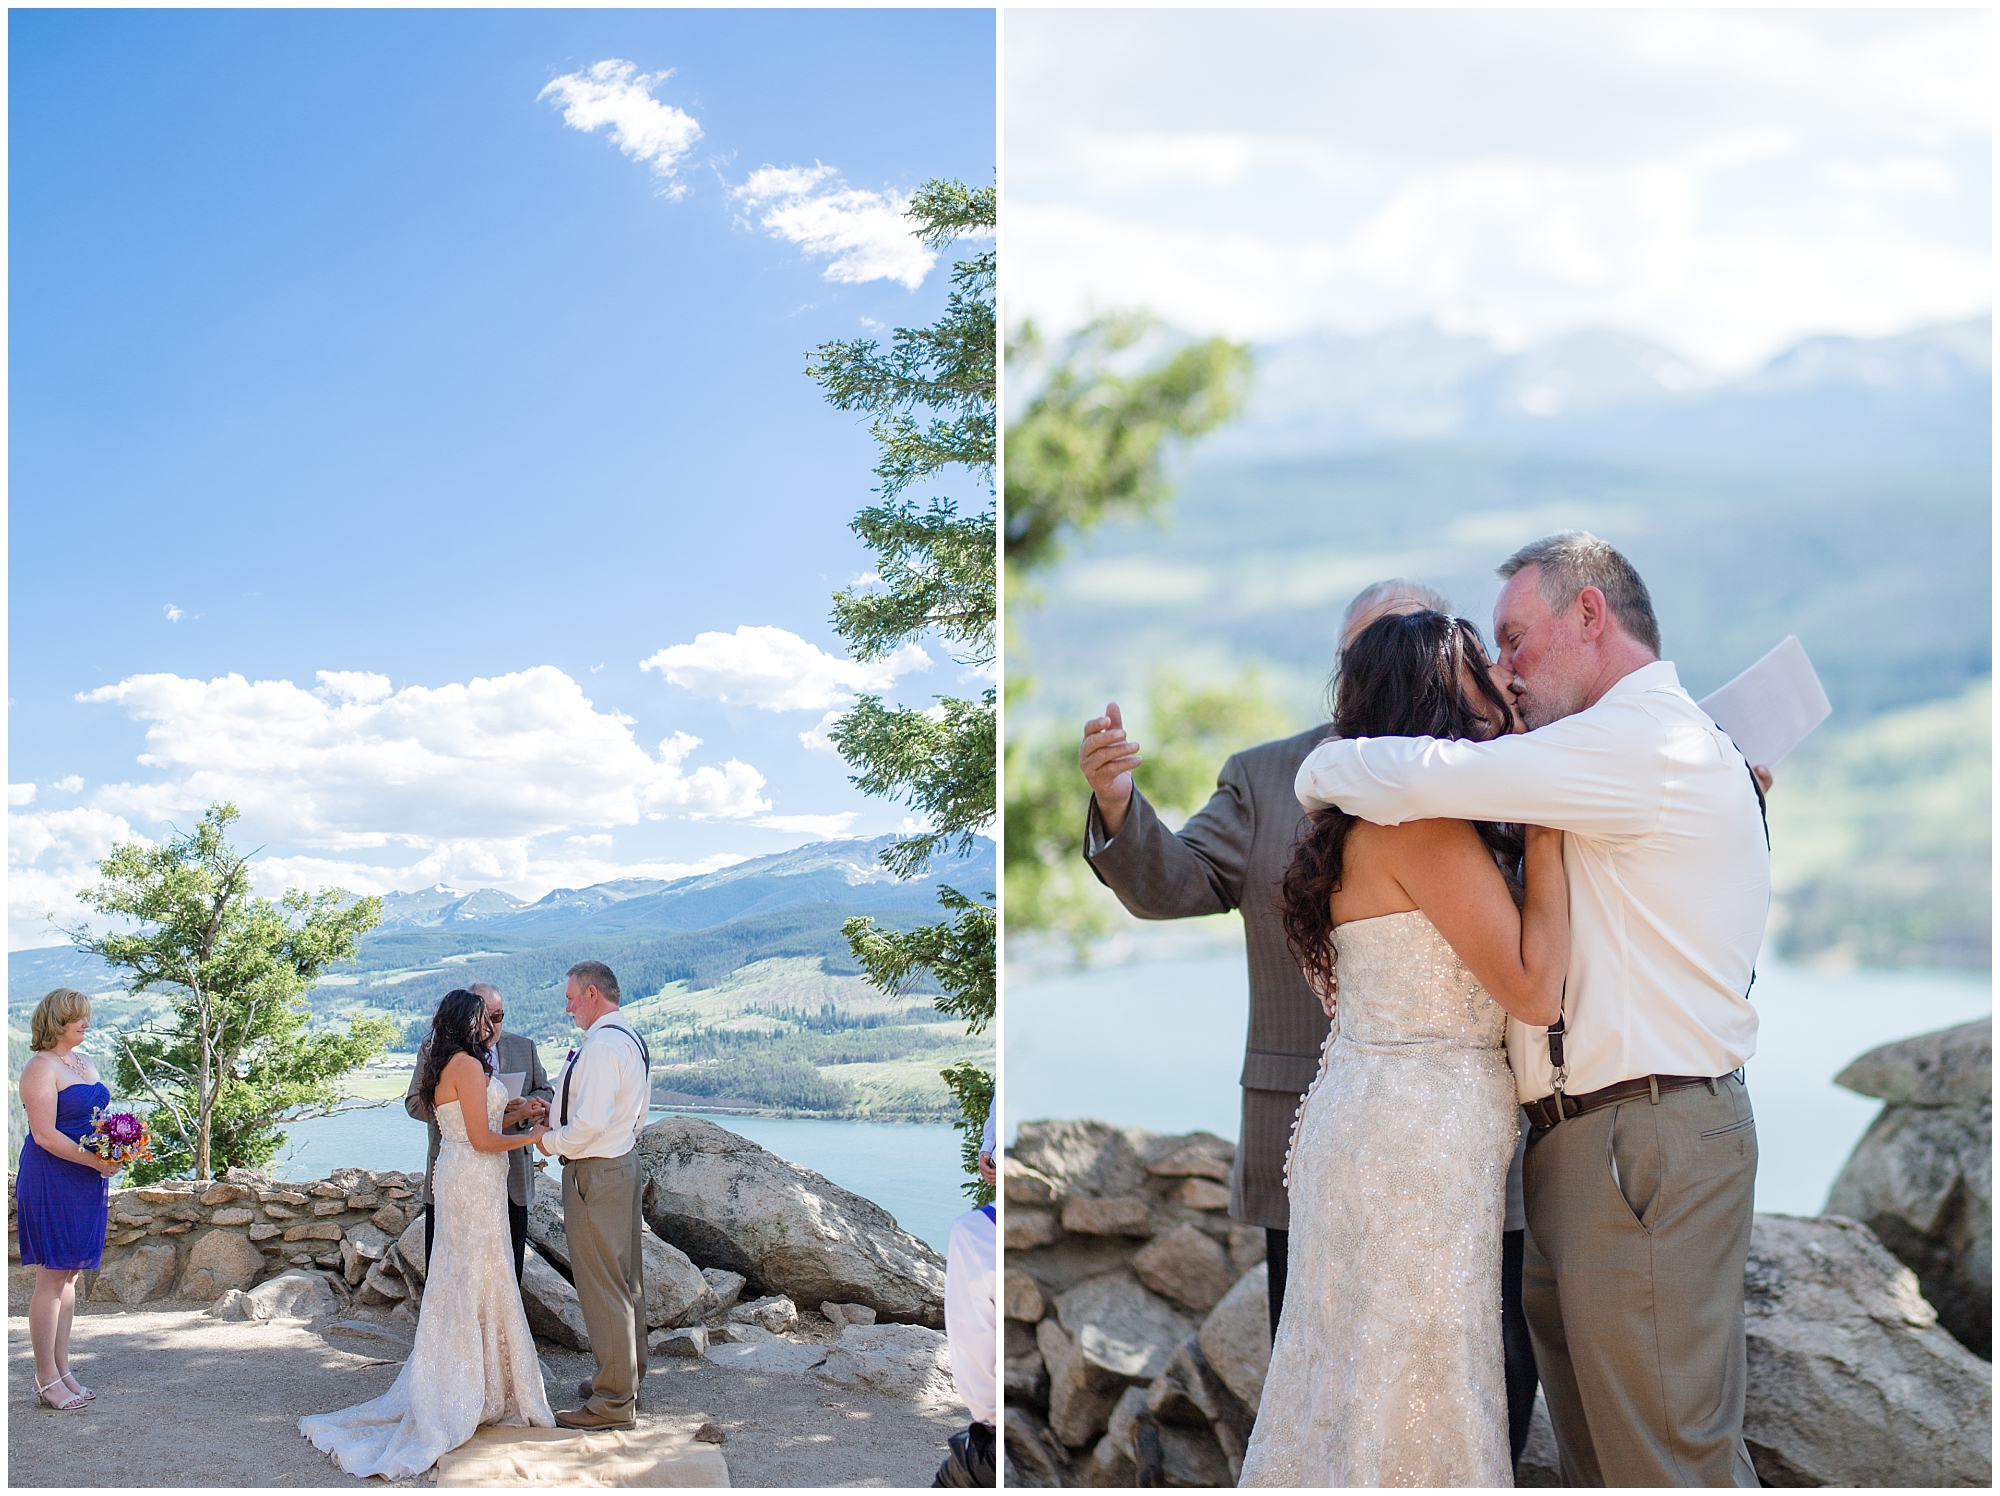 At their Sapphire point wedding, the couple share their first kiss.